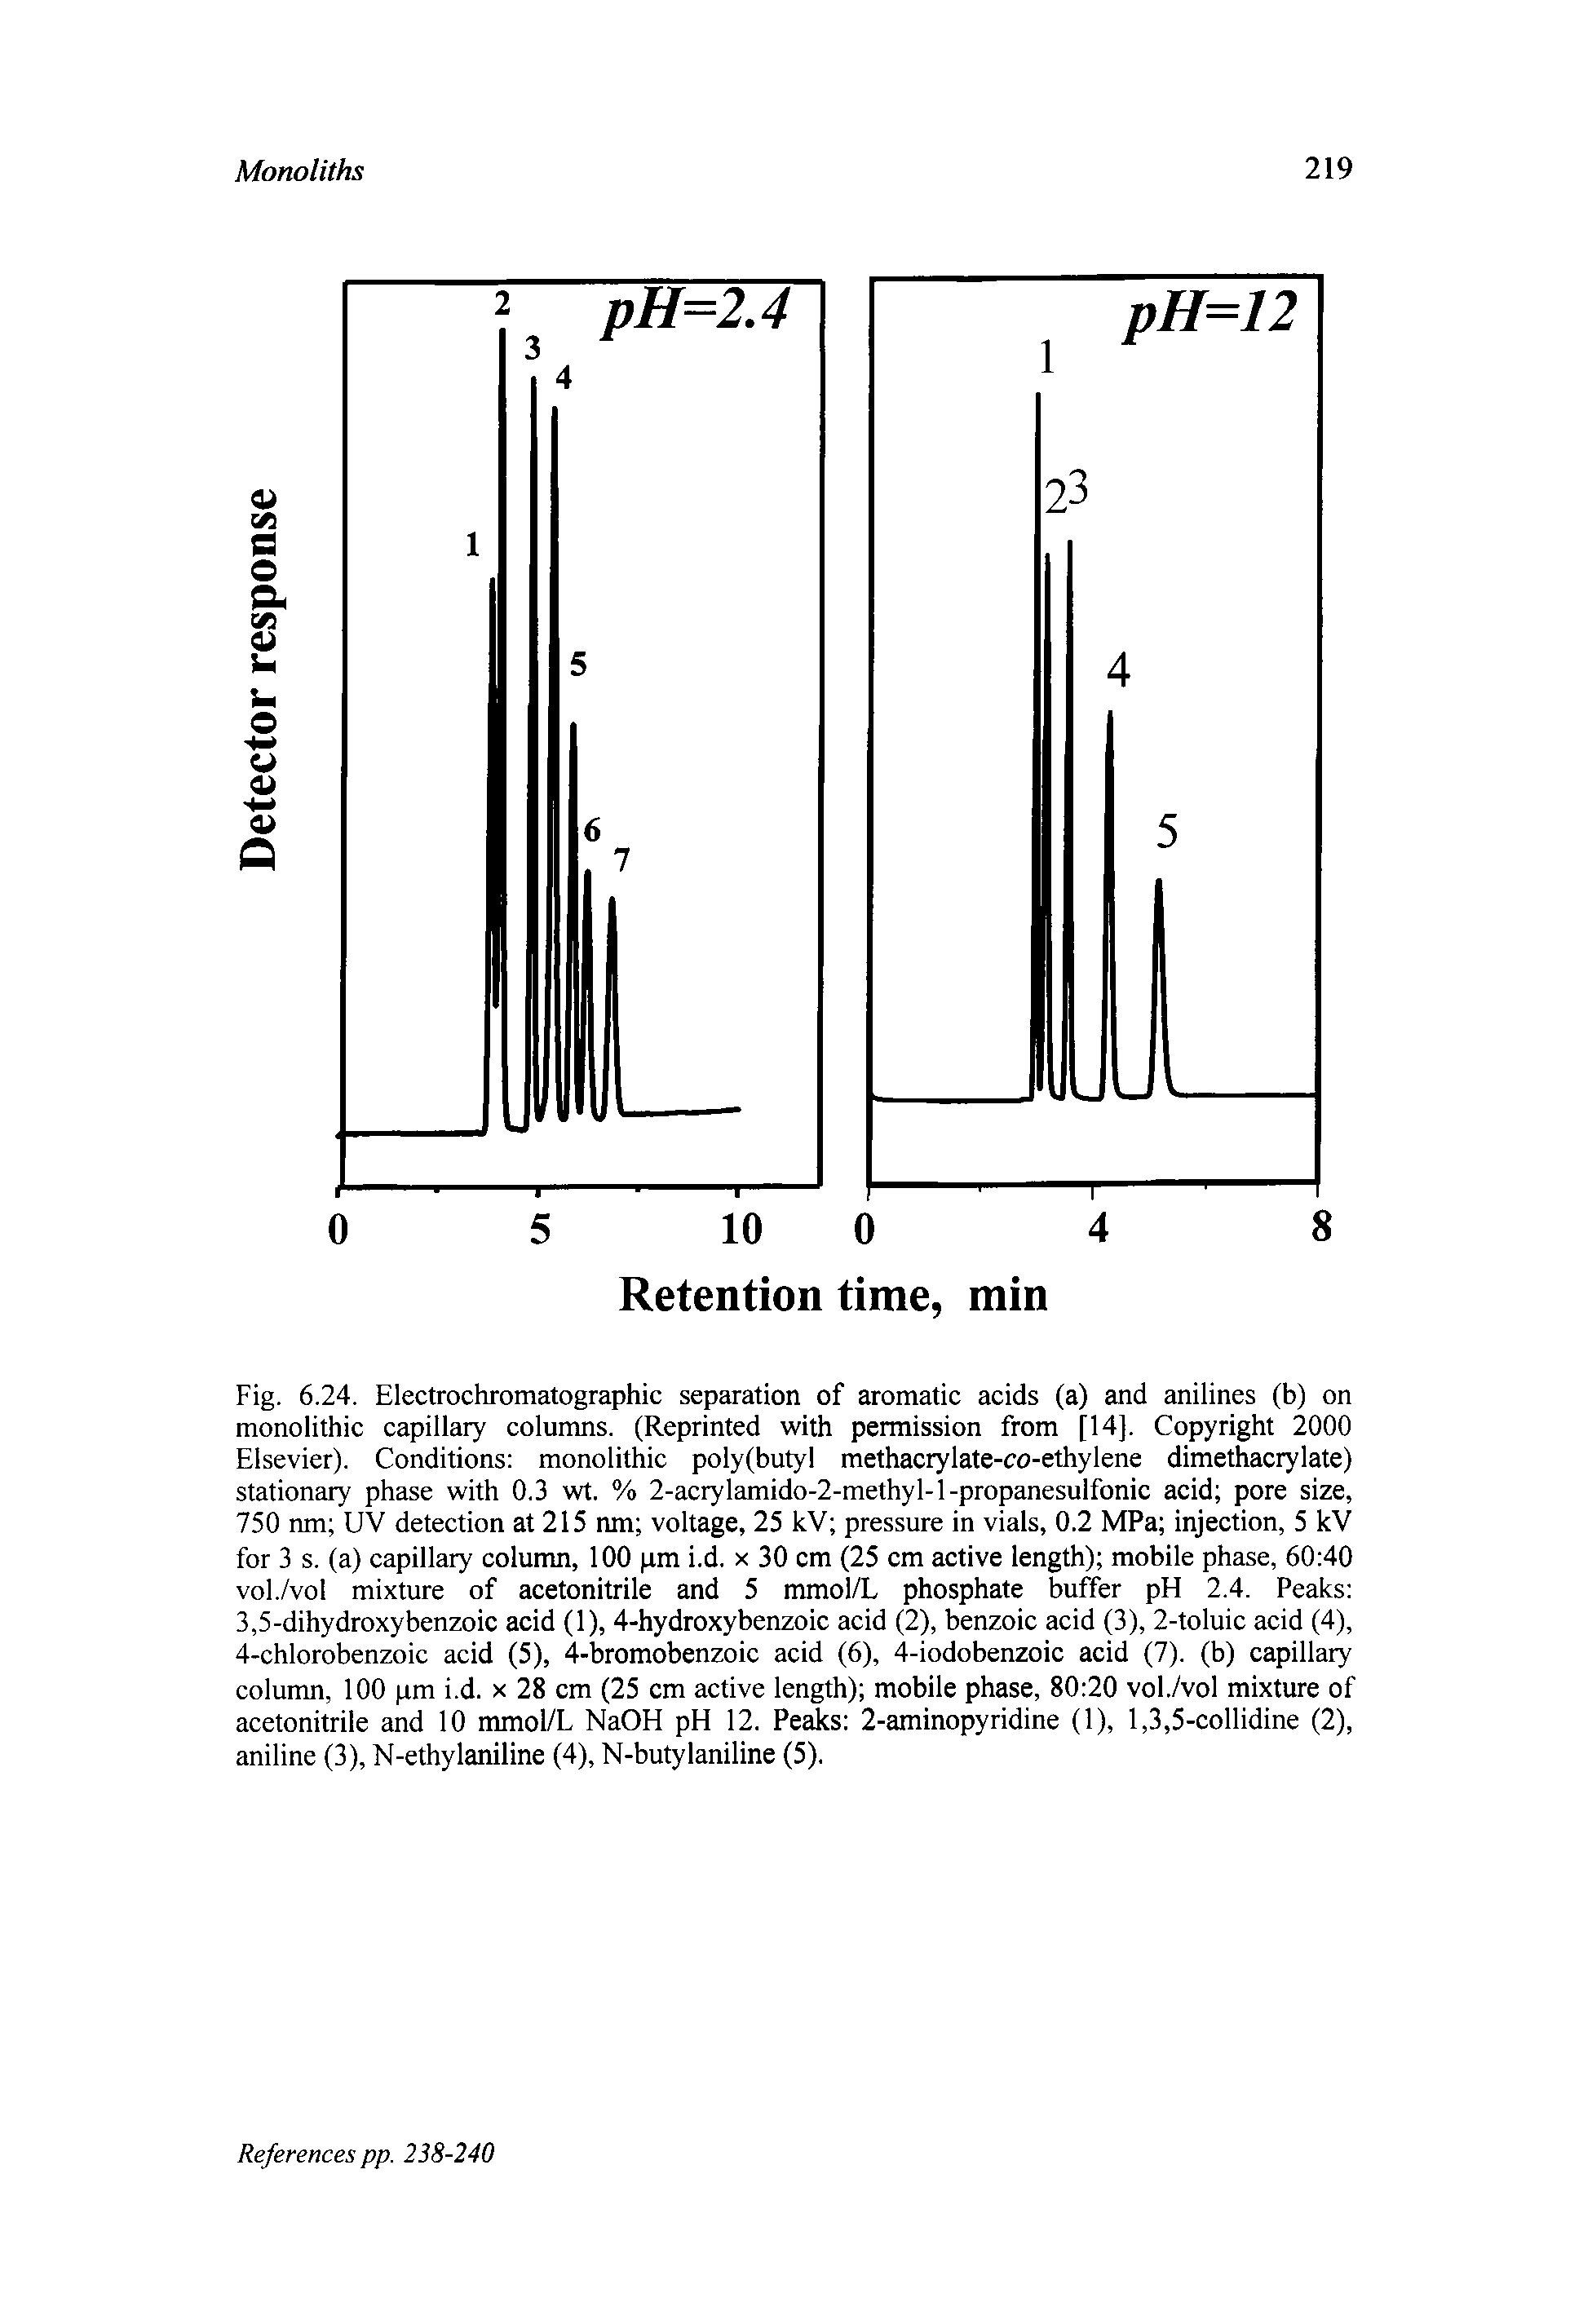 Fig. 6.24. Electrochromatographic separation of aromatic acids (a) and anilines (b) on monolithic capillary columns. (Reprinted with permission from [14]. Copyright 2000 Elsevier). Conditions monolithic poly(butyl methacrylate-co-ethylene dimethacrylate) stationary phase with 0.3 wt. % 2-acrylamido-2-methyl-l-propanesulfonic acid pore size, 750 nm UV detection at 215 nm voltage, 25 kV pressure in vials, 0.2 MPa injection, 5 kV for 3 s. (a) capillary column, 100 pm i.d. x 30 cm (25 cm active length) mobile phase, 60 40 vol./vol mixture of acetonitrile and 5 mmol/L phosphate buffer pH 2.4. Peaks 3,5-dihydroxybenzoic acid (1), 4-hydroxybenzoic acid (2), benzoic acid (3), 2-toluic acid (4), 4-chlorobenzoic acid (5), 4-bromobenzoic acid (6), 4-iodobenzoic acid (7). (b) capillary column, 100 pm i.d. x 28 cm (25 cm active length) mobile phase, 80 20 vol./vol mixture of acetonitrile and 10 mmol/L NaOH pH 12. Peaks 2-aminopyridine (1), 1,3,5-collidine (2), aniline (3), N-ethylaniline (4), N-butylaniline (5).